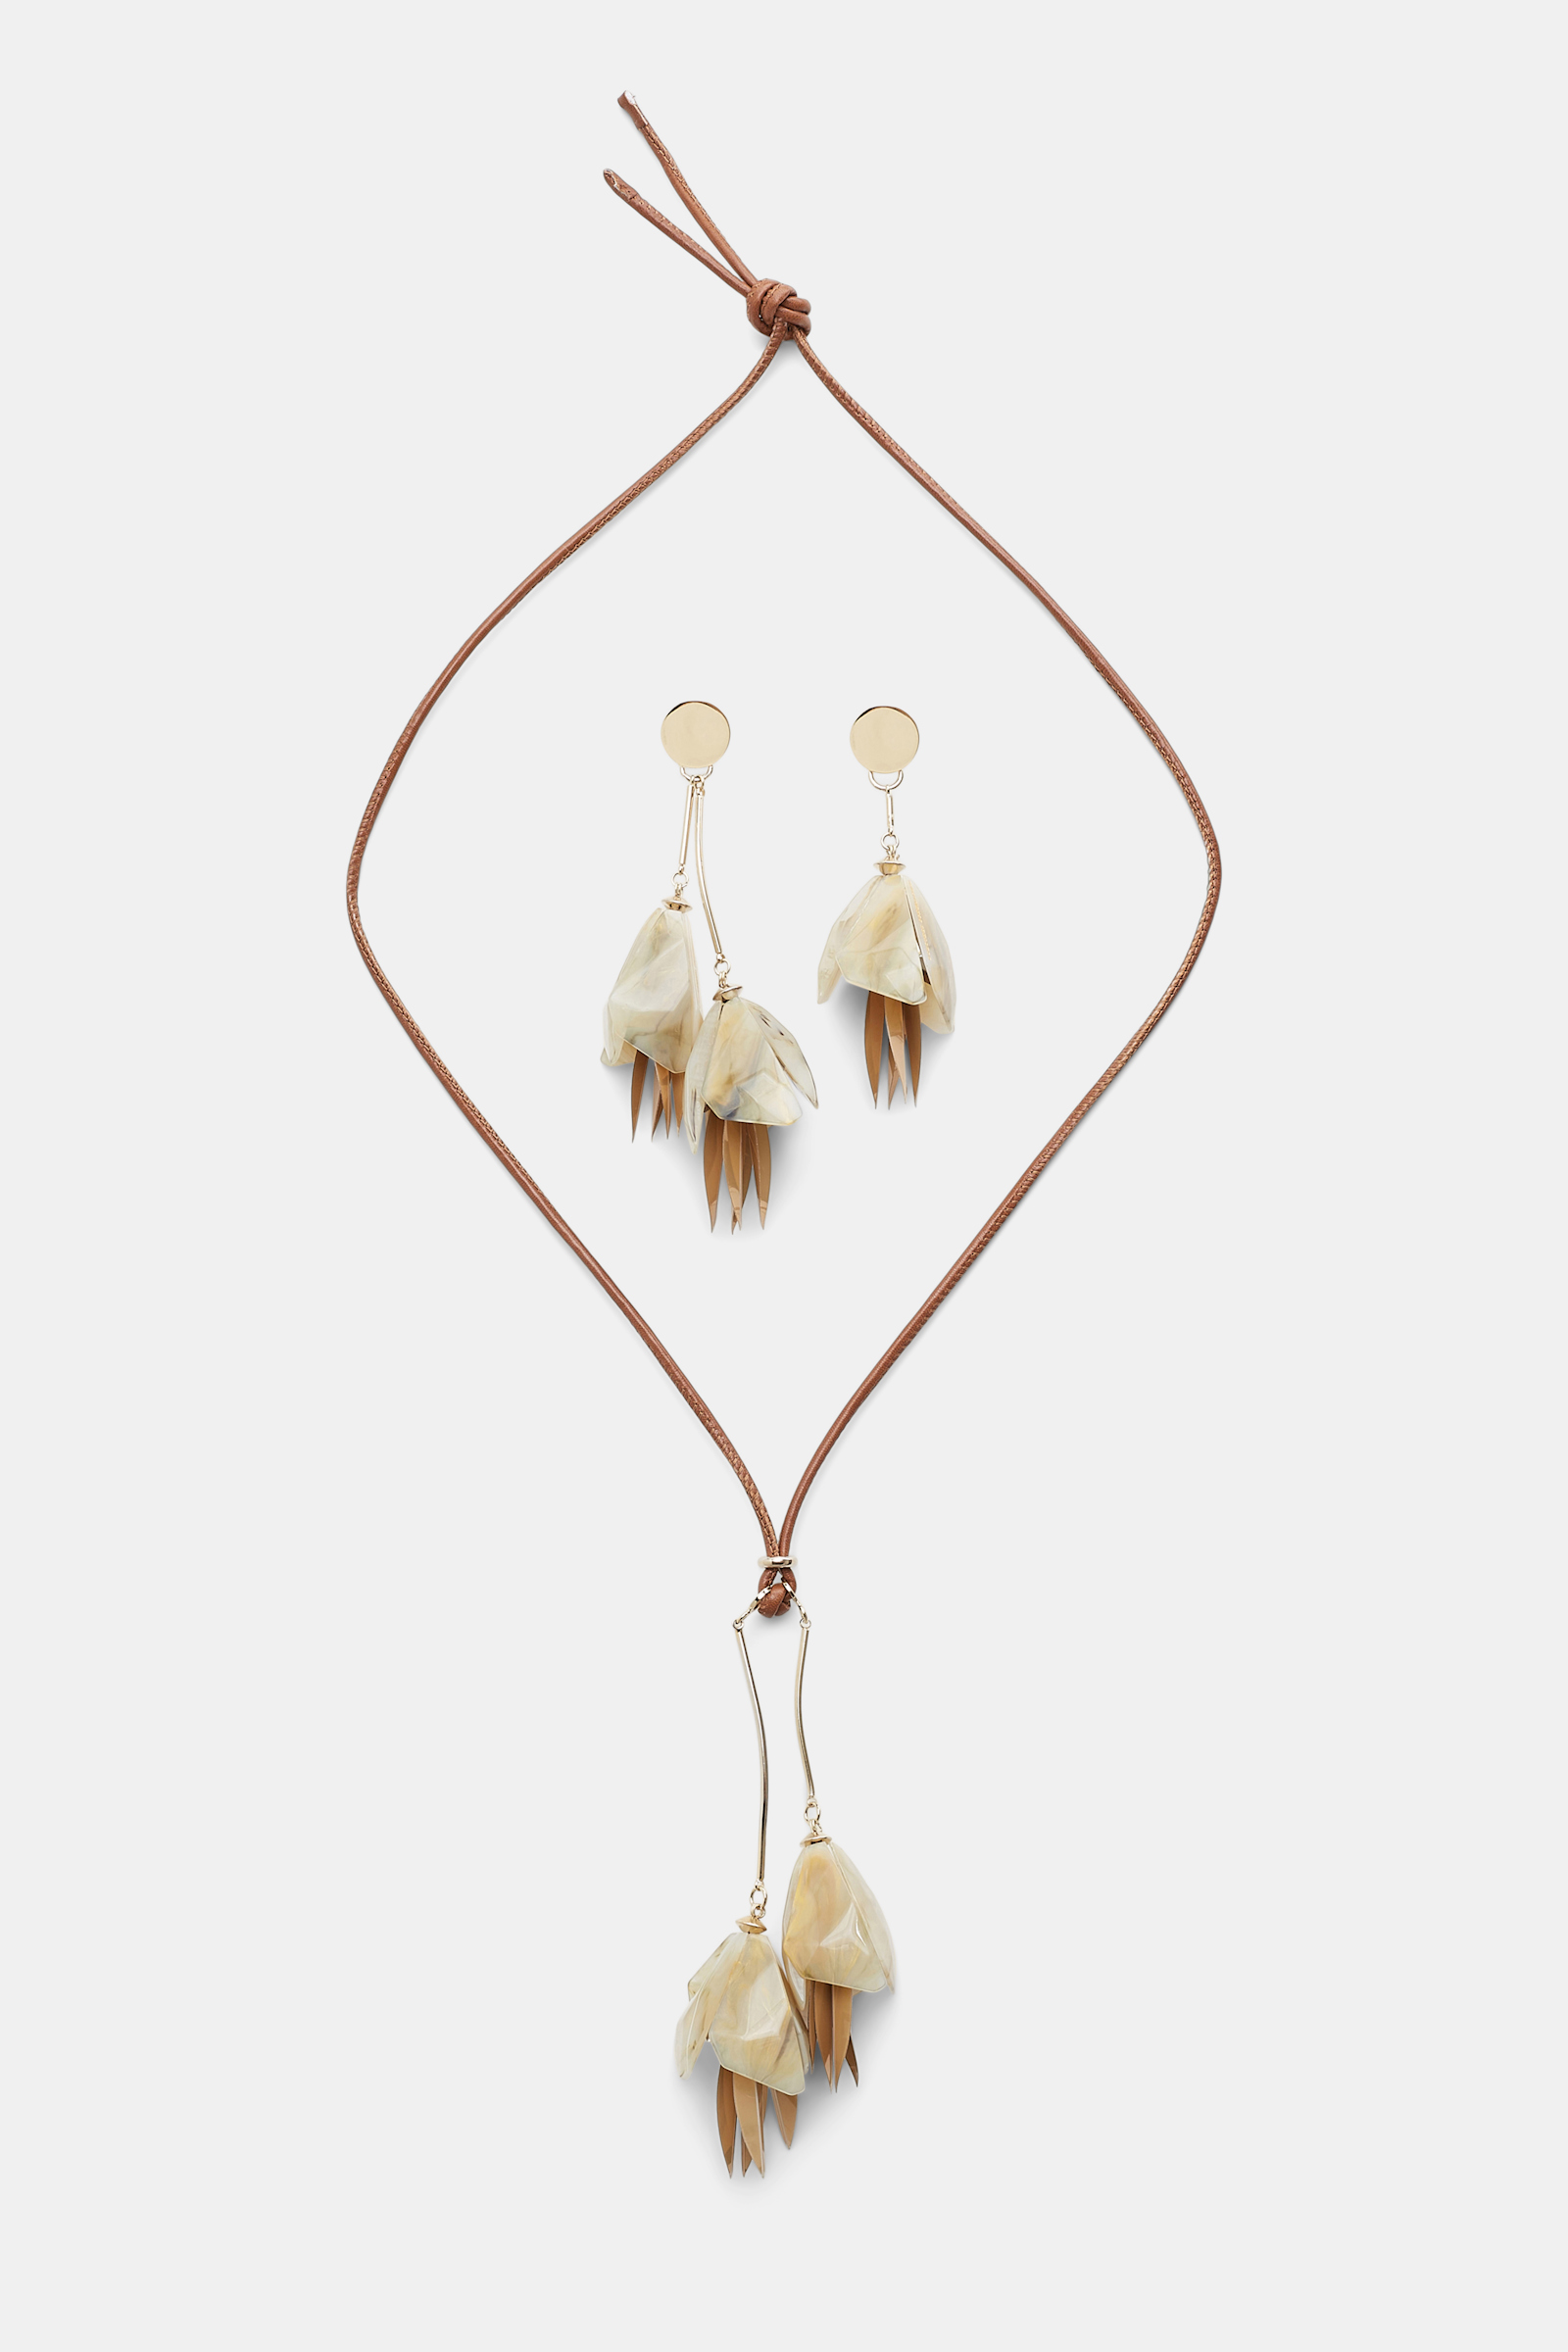 Dorothee Schumacher Necklace with hanging flower pendant on leather cord medium camel